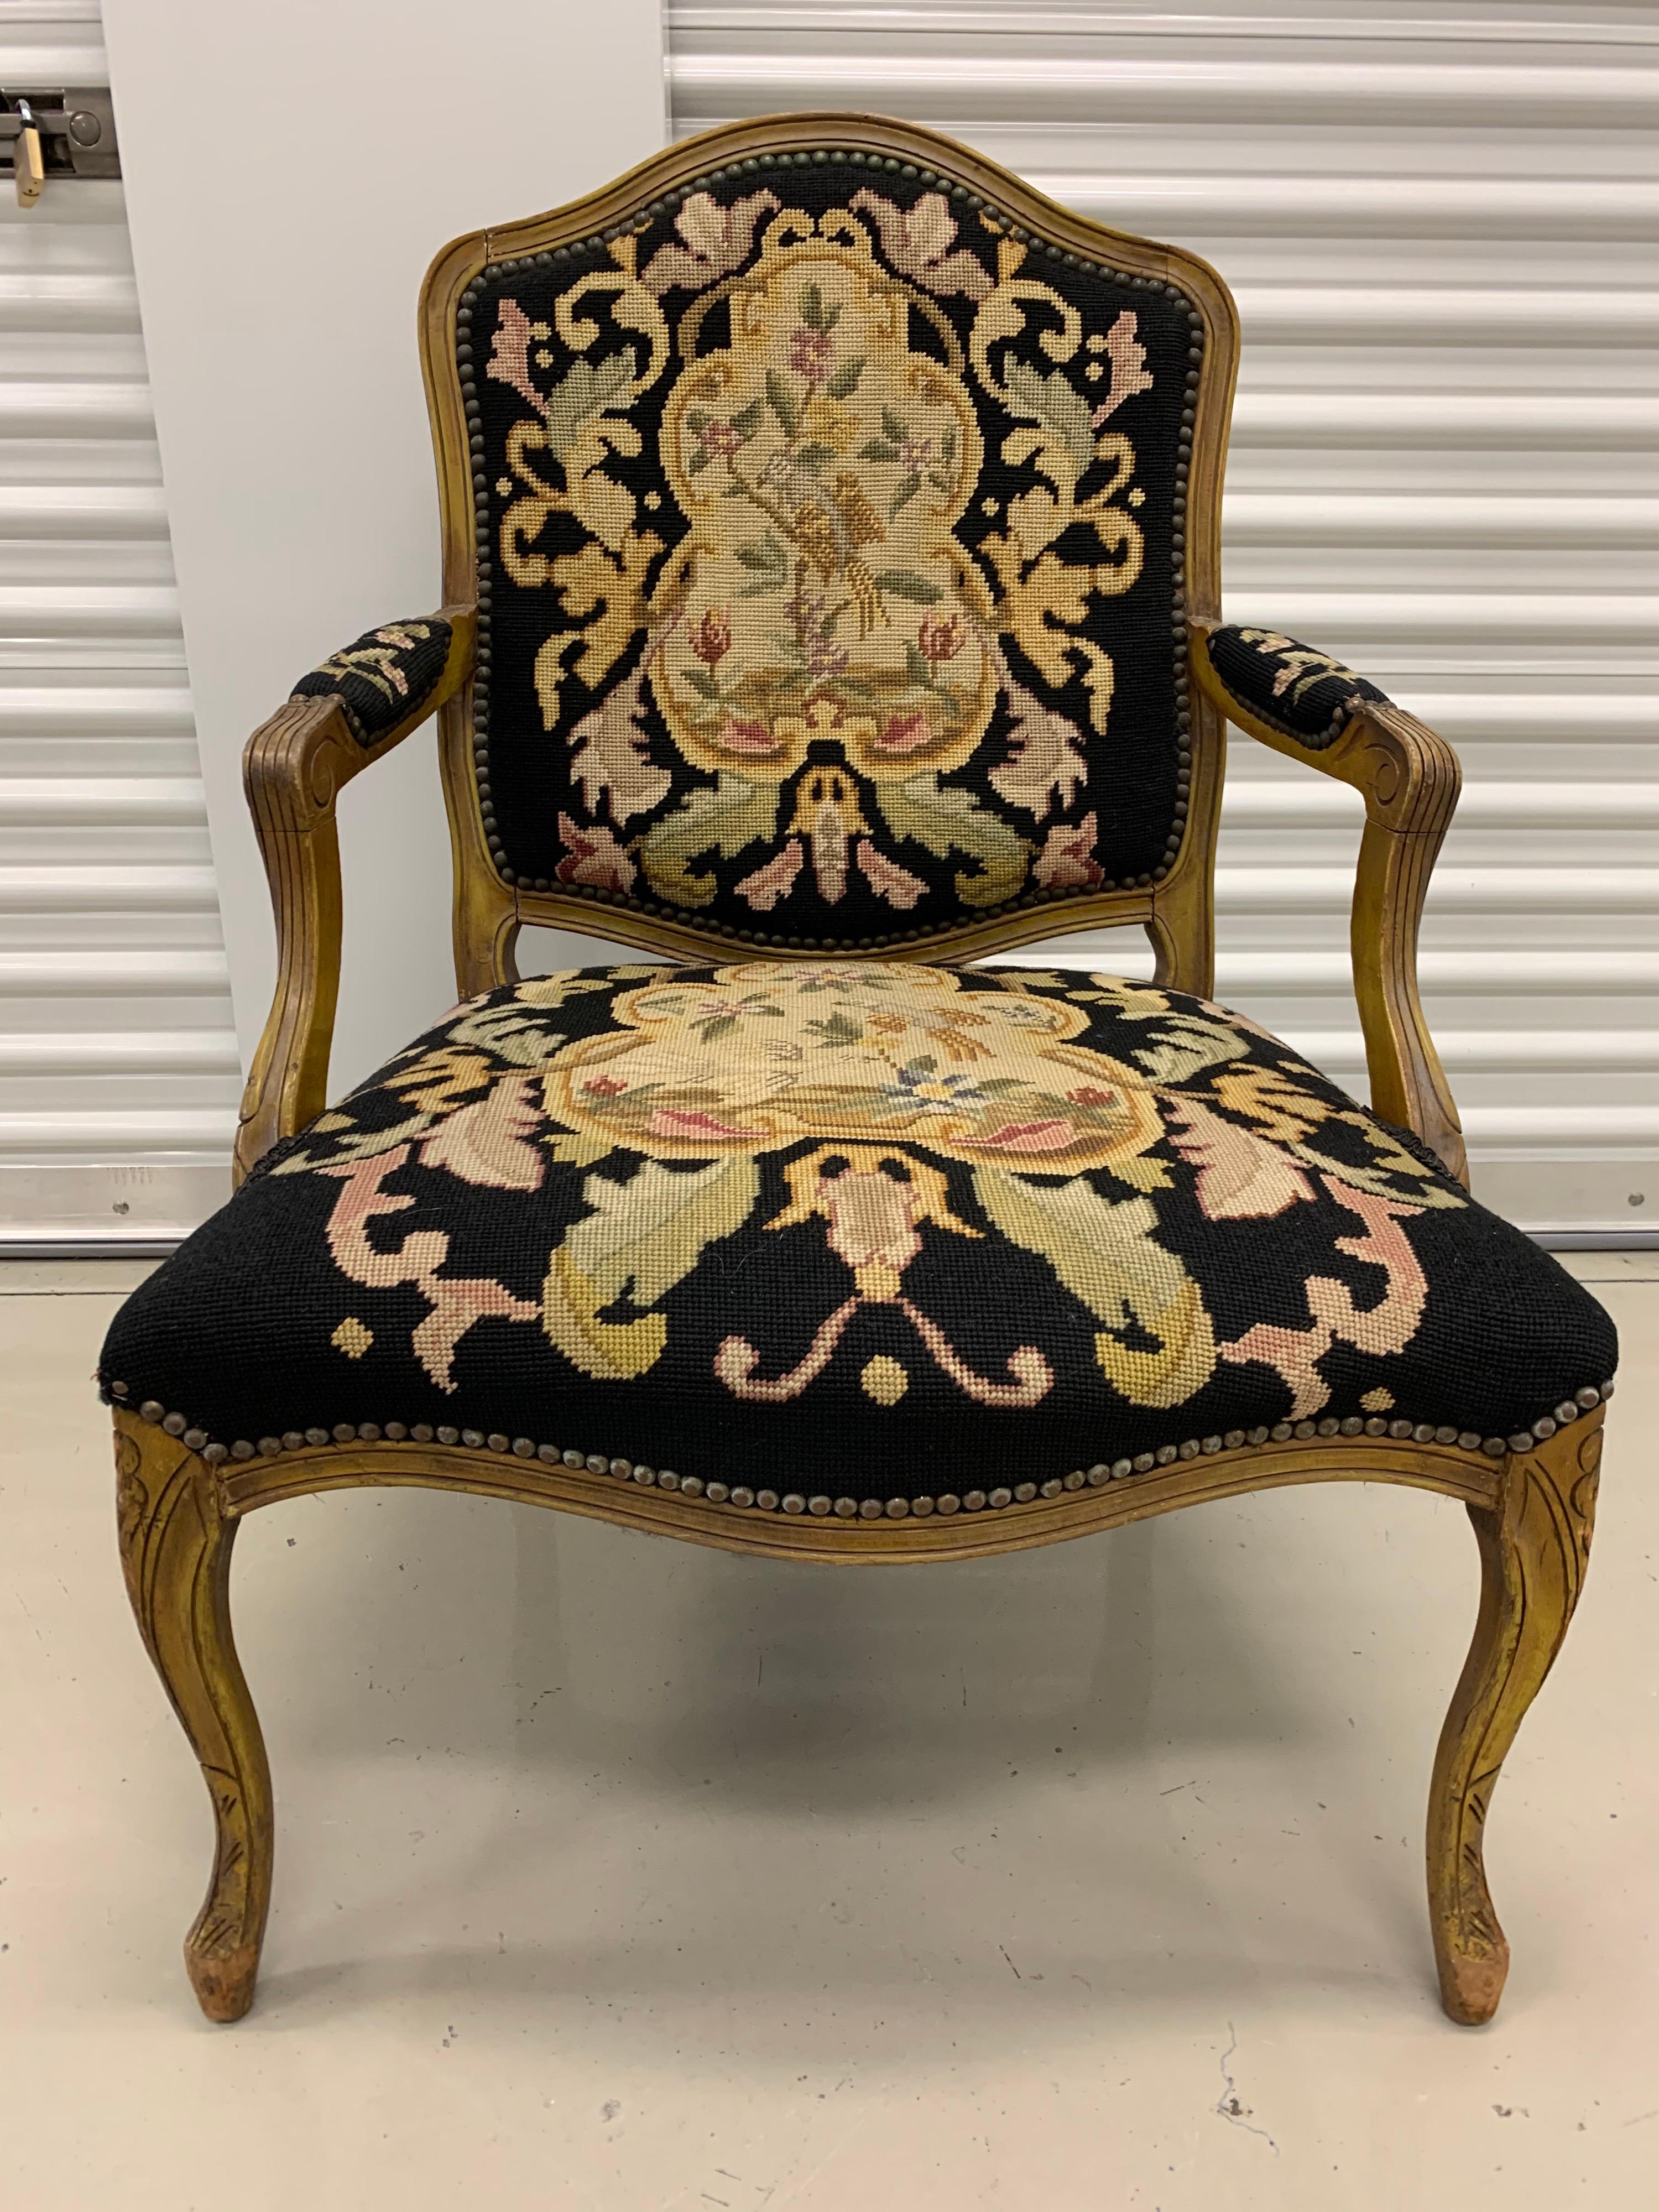 Elegant needlepoint open air armchair. Needlepoint has a wonderful color scheme, see pictures.
There are nailheads throughout.  Note the back of the seat back is unfinished.